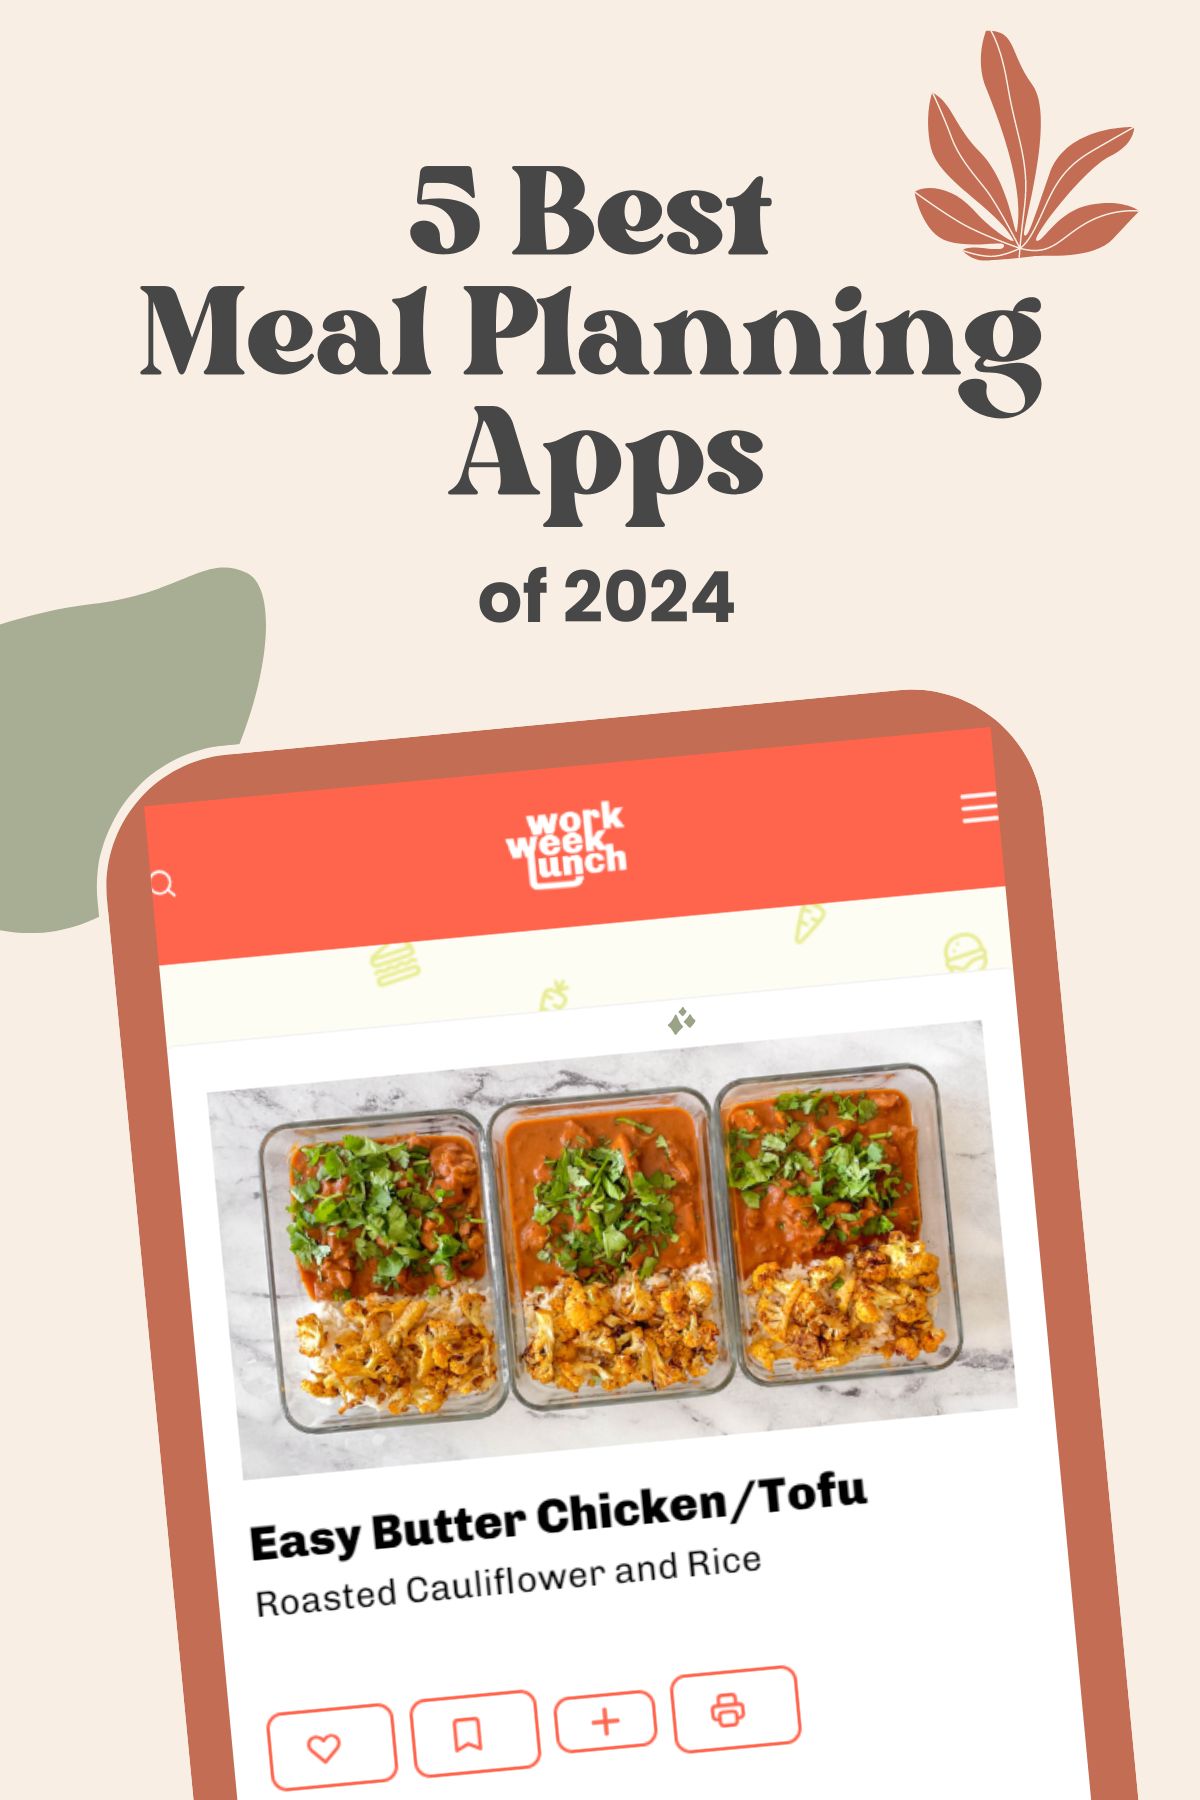 5 Best Meal Planning Apps of 2024 2